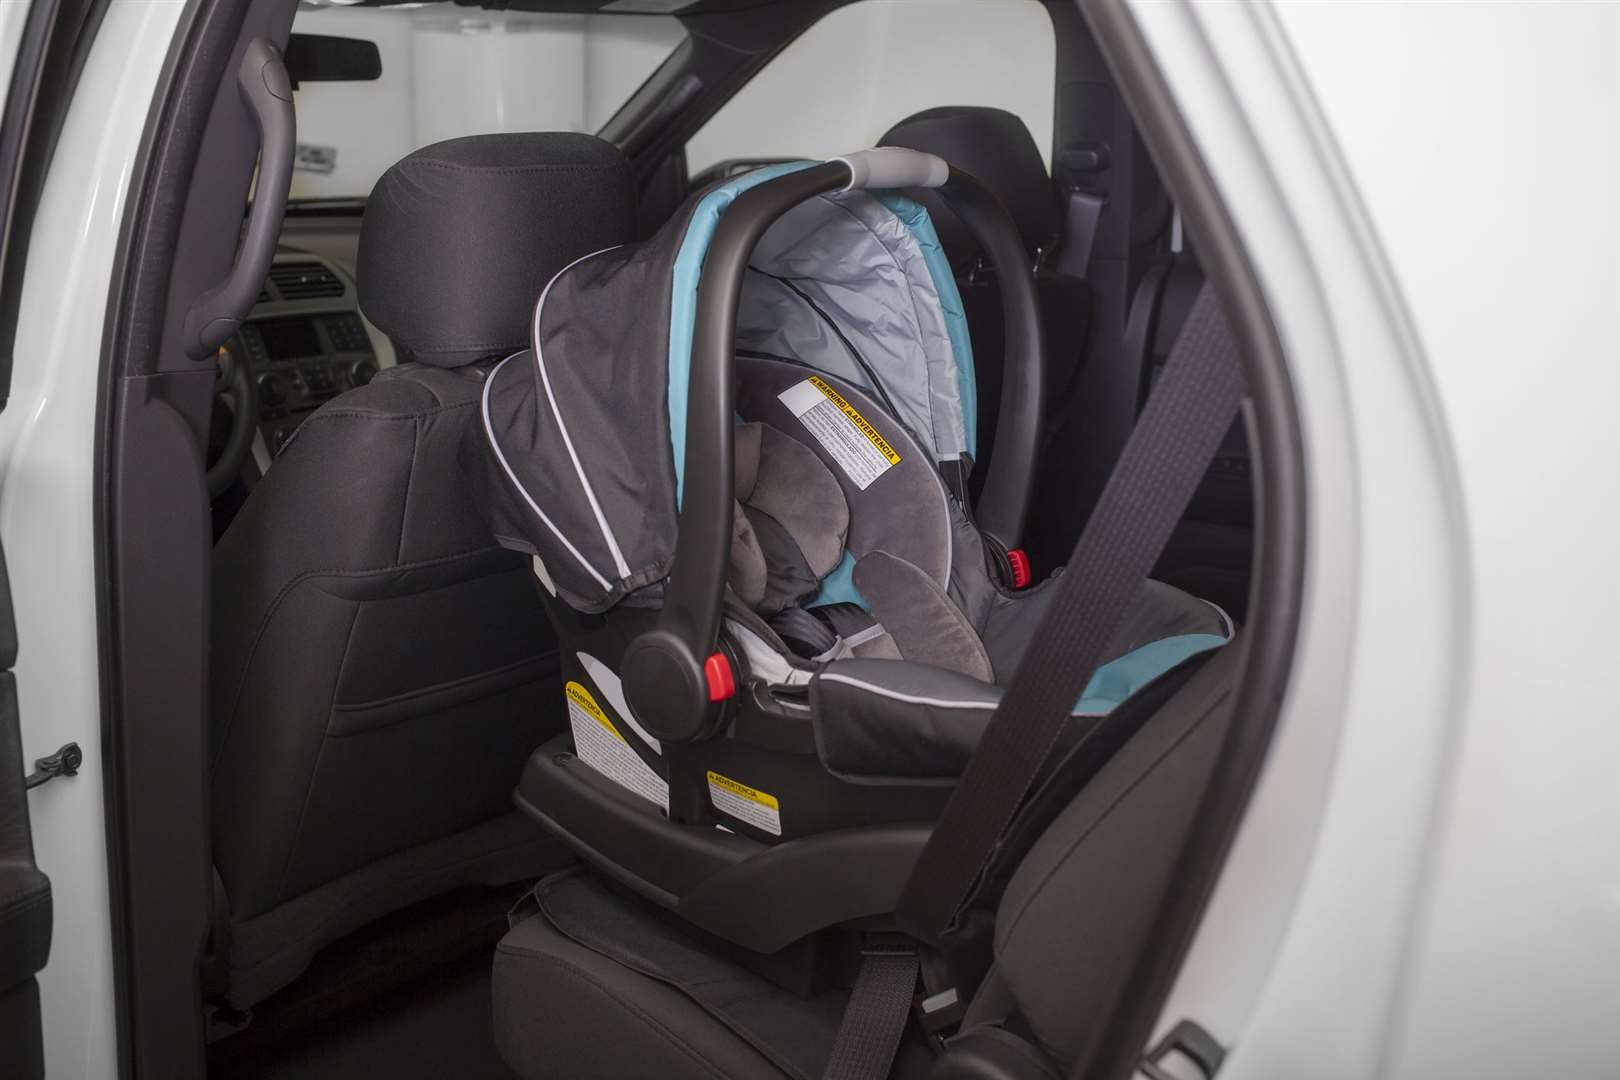 Buying a car seat? Have the seat demonstrated in your car before you purchase